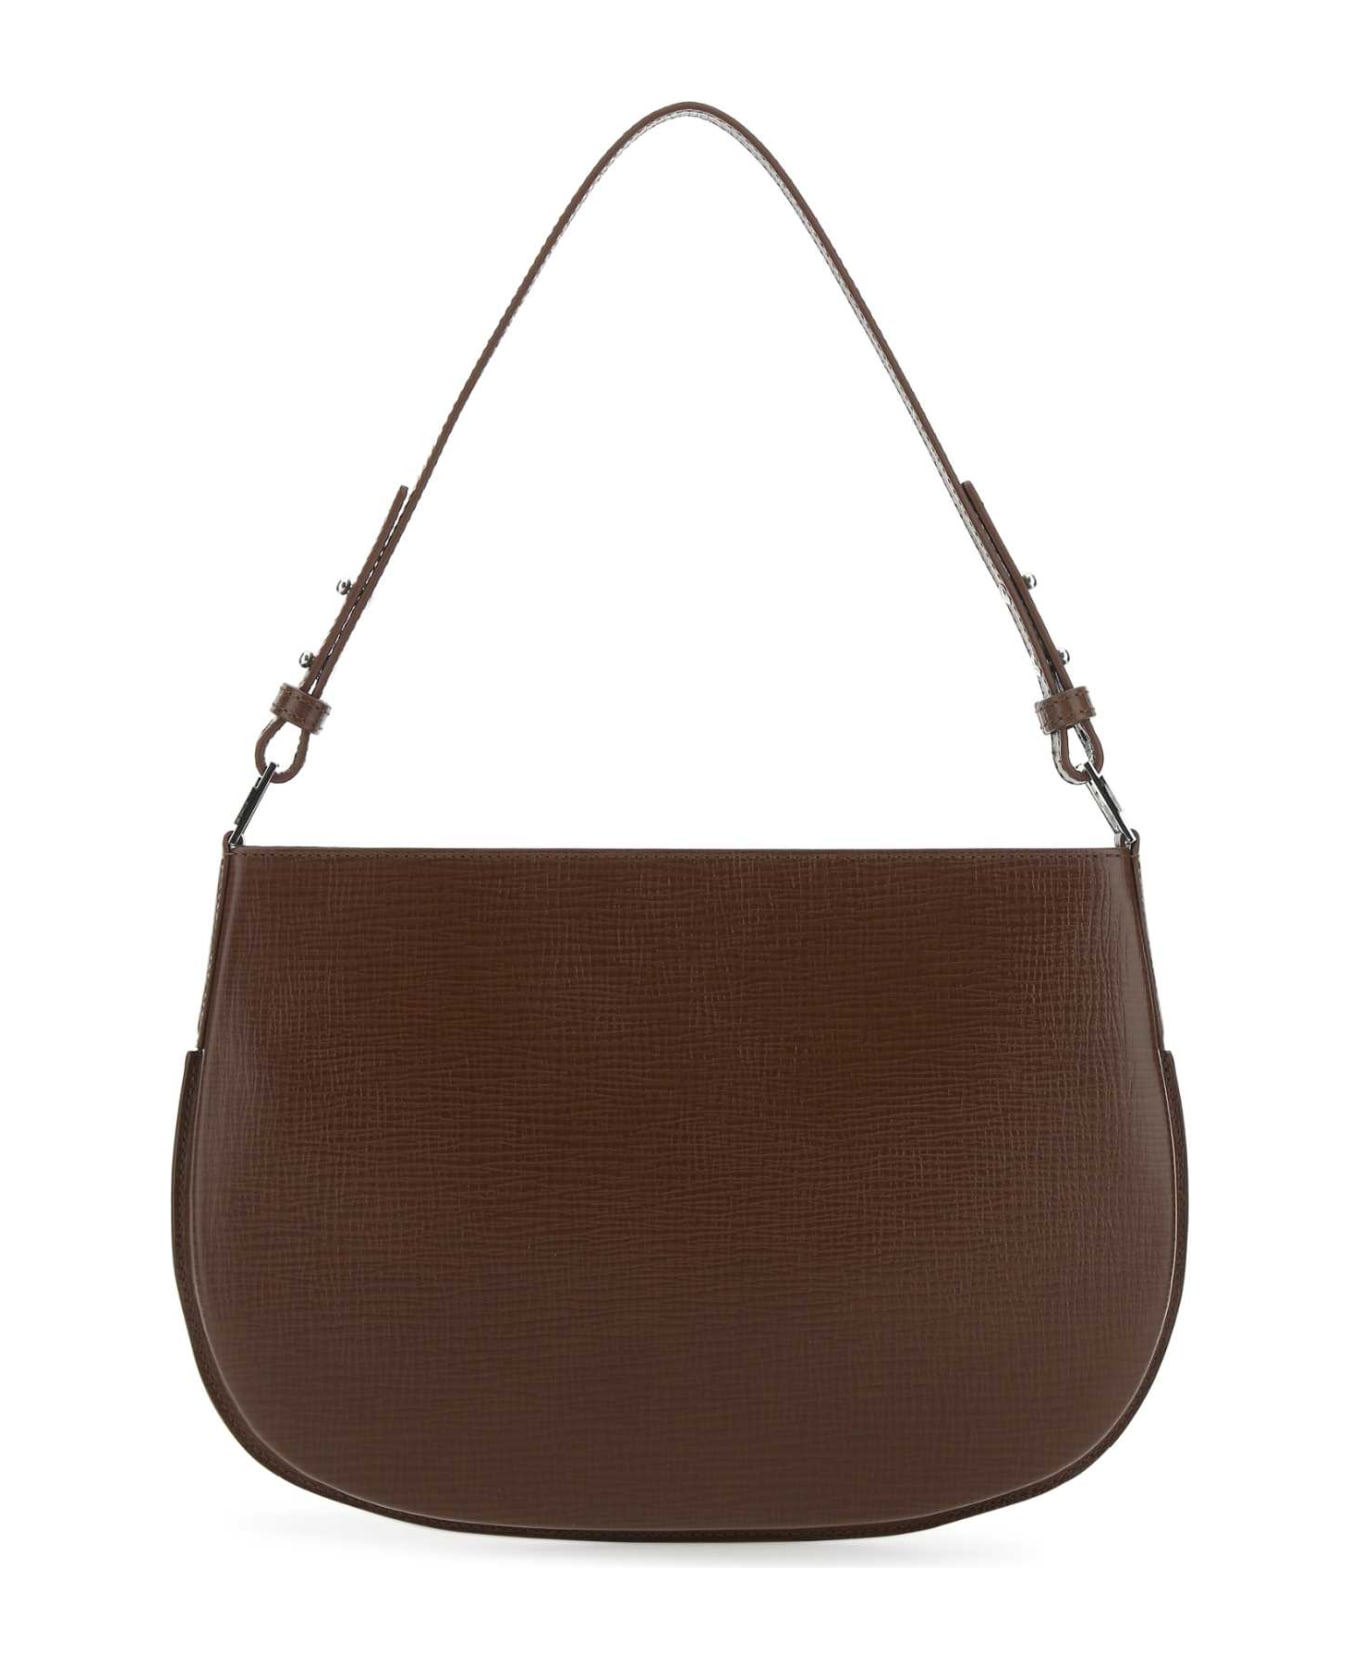 BY FAR Brown Leather Issa Shoulder Bag - TABAC